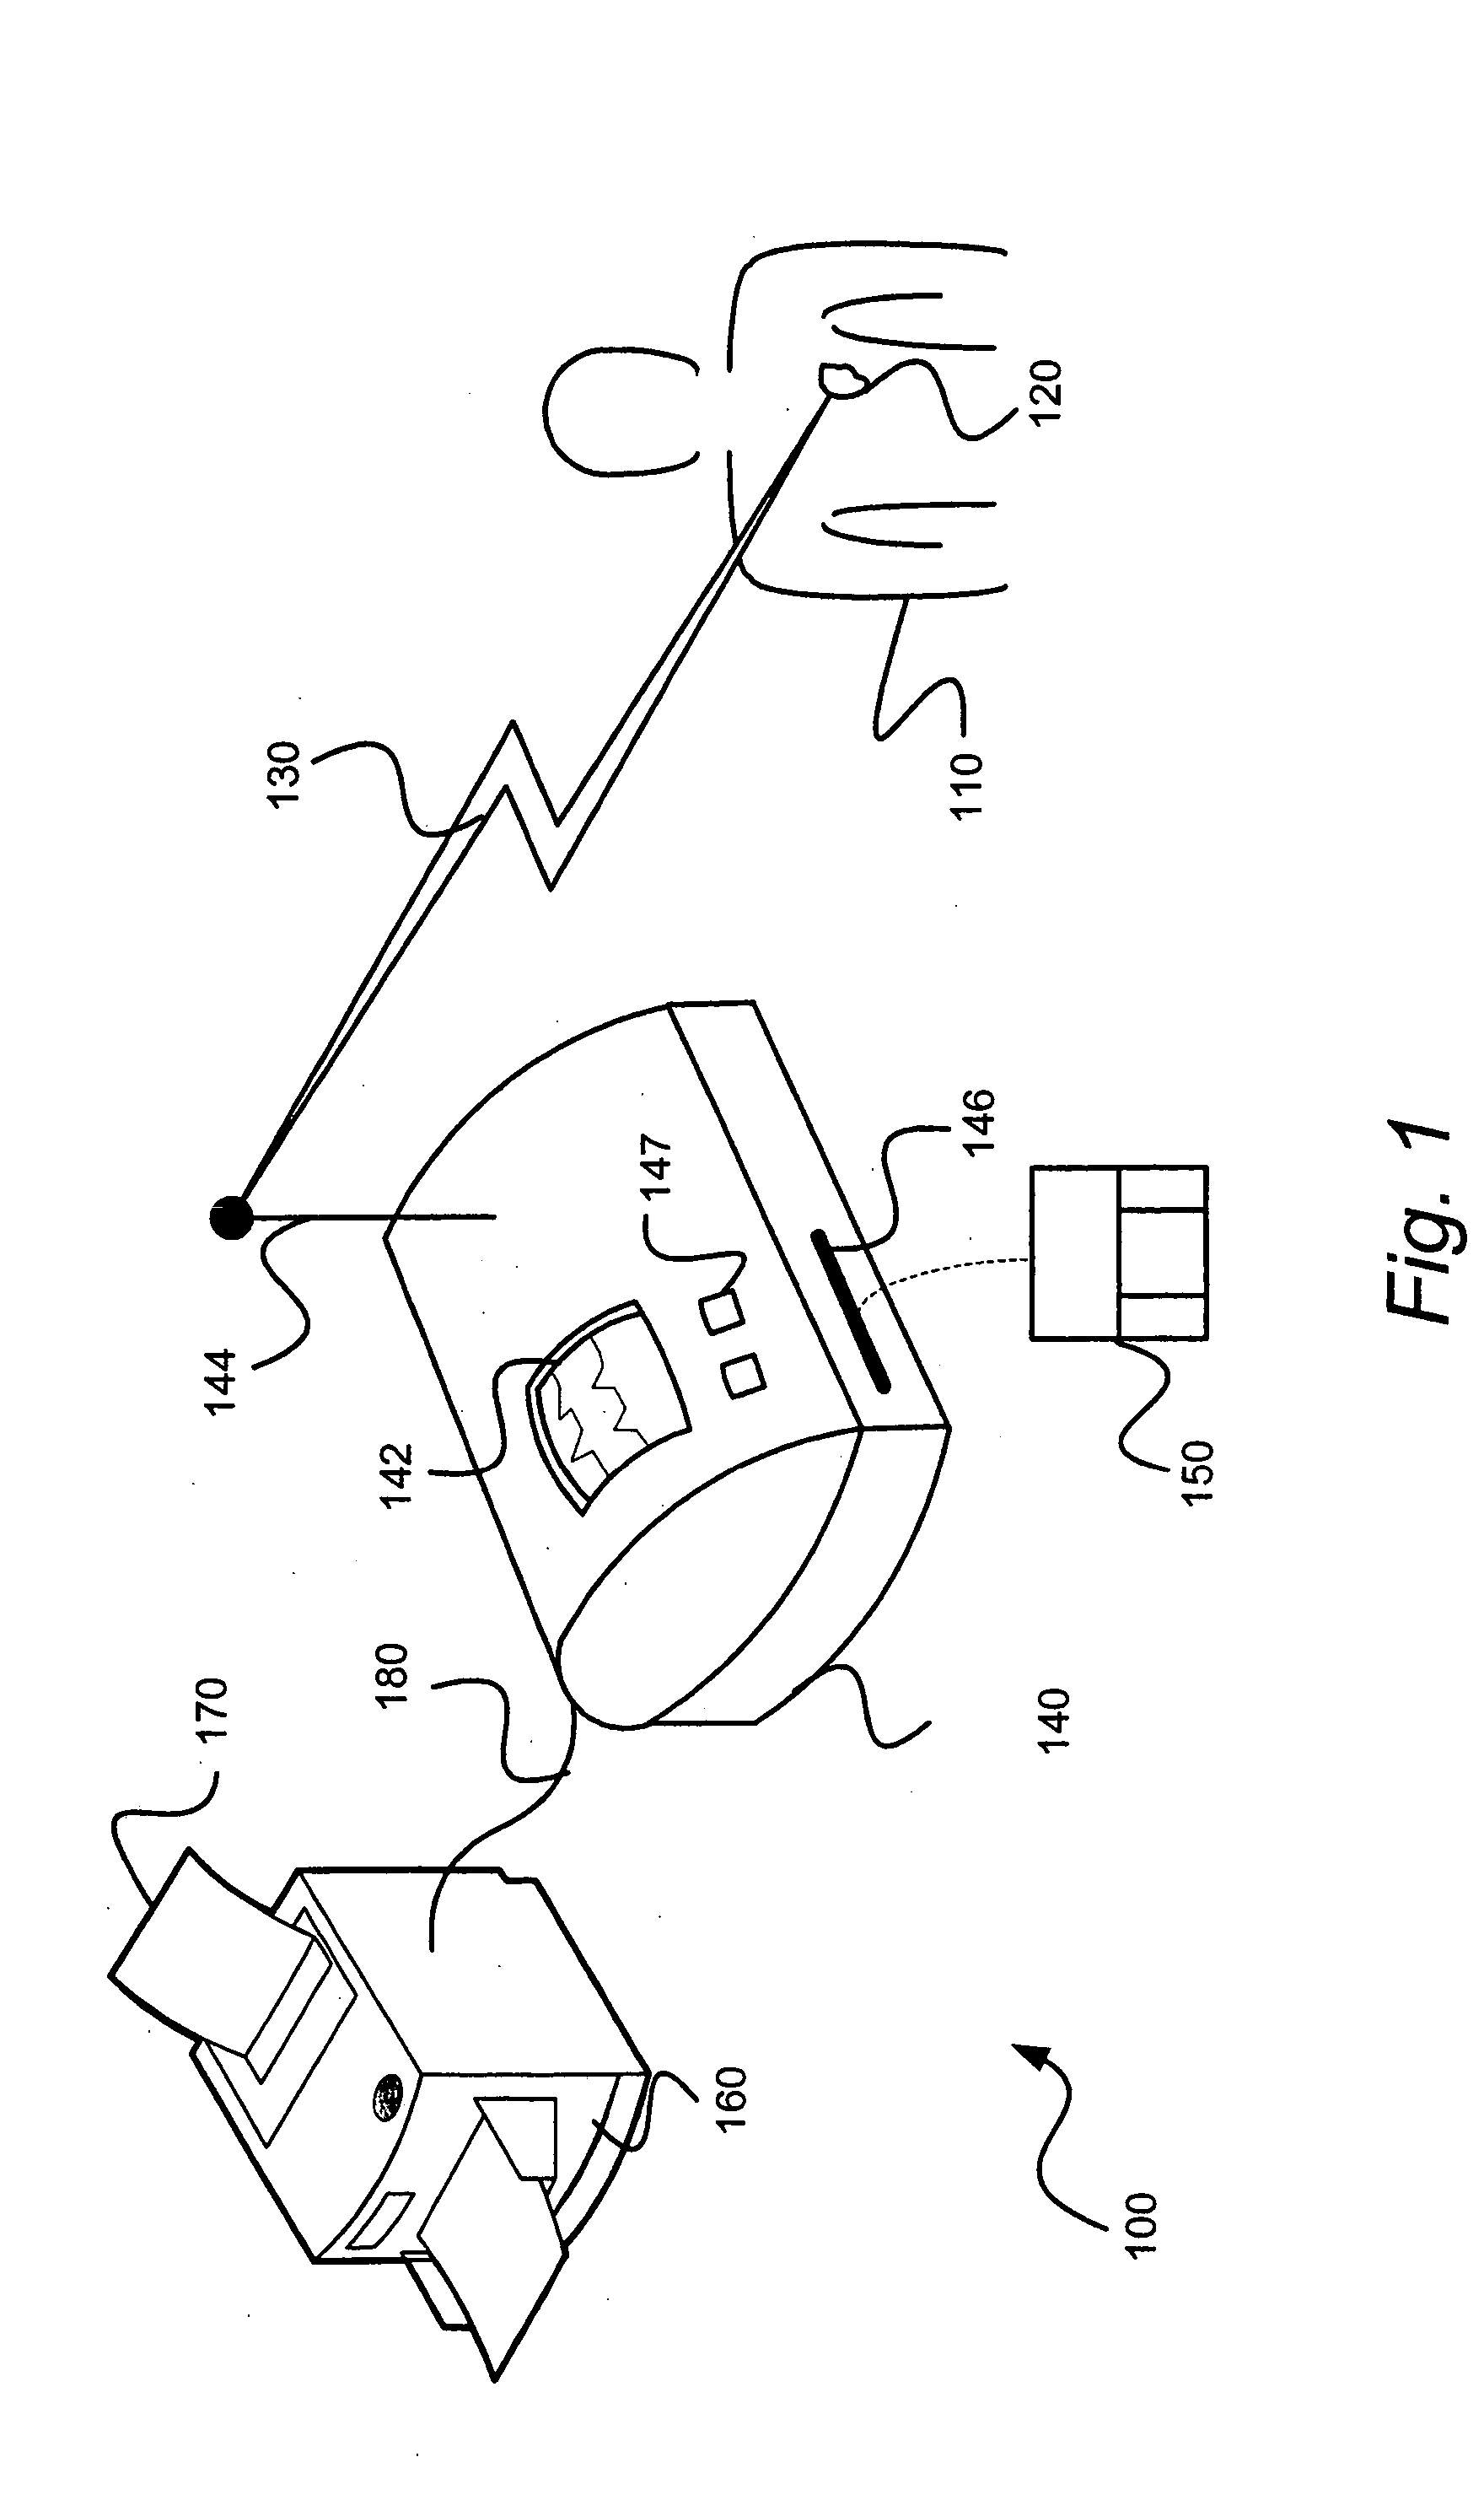 Systems and methods for providing variable medical information